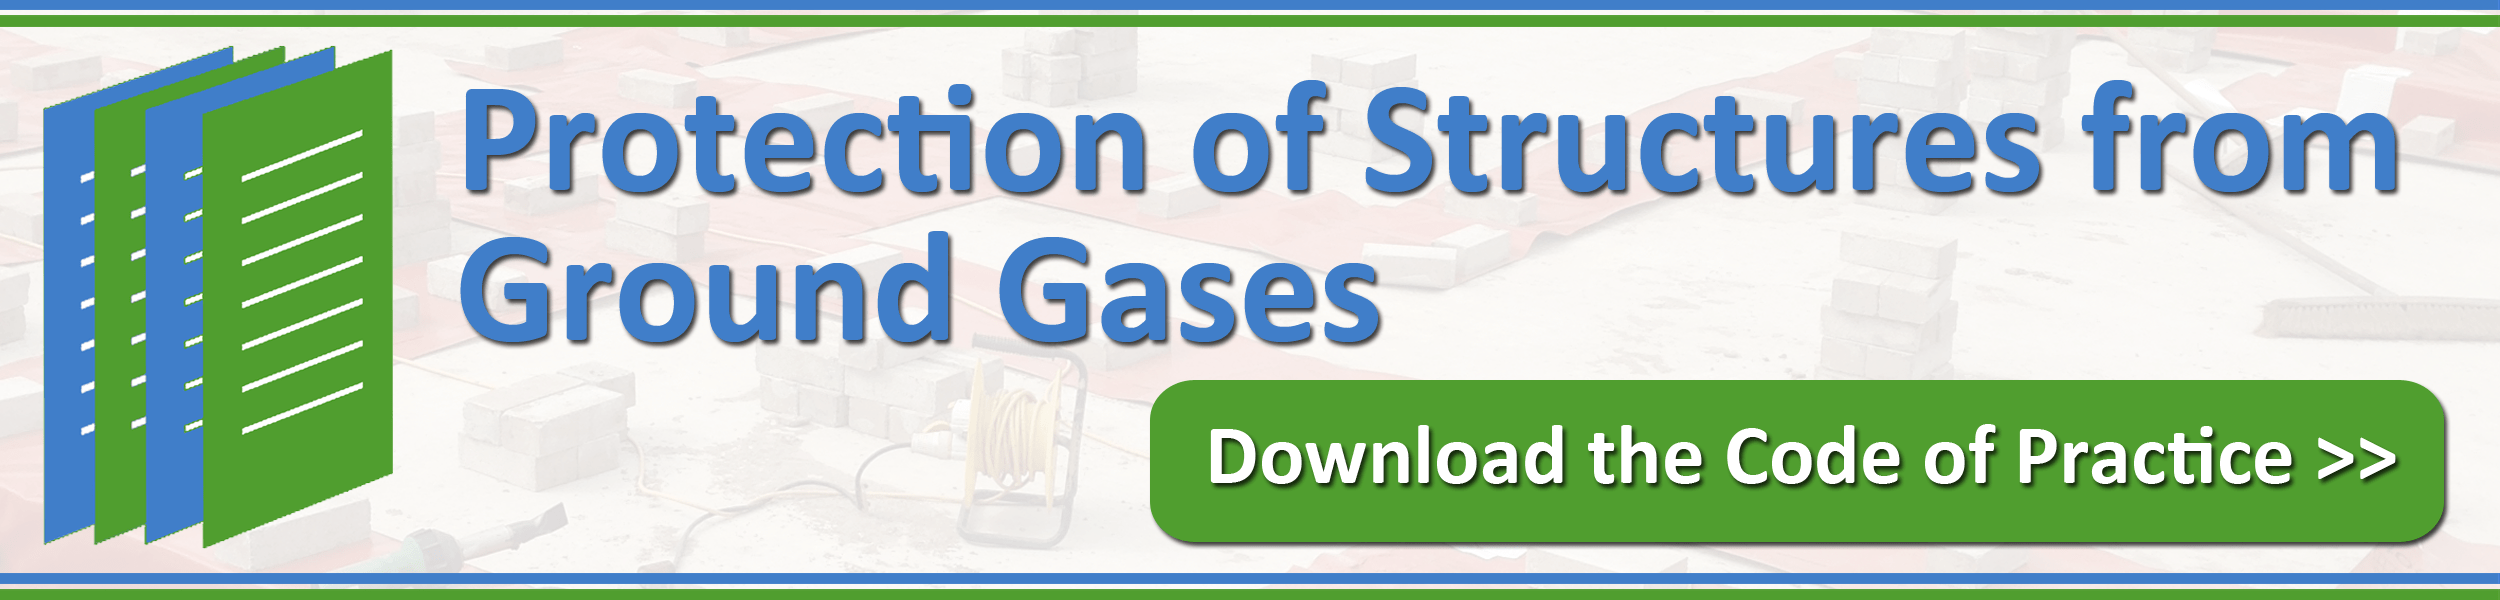 Code-of-Practice-for-Protection-of-Structures-from-Ground-Gases-1